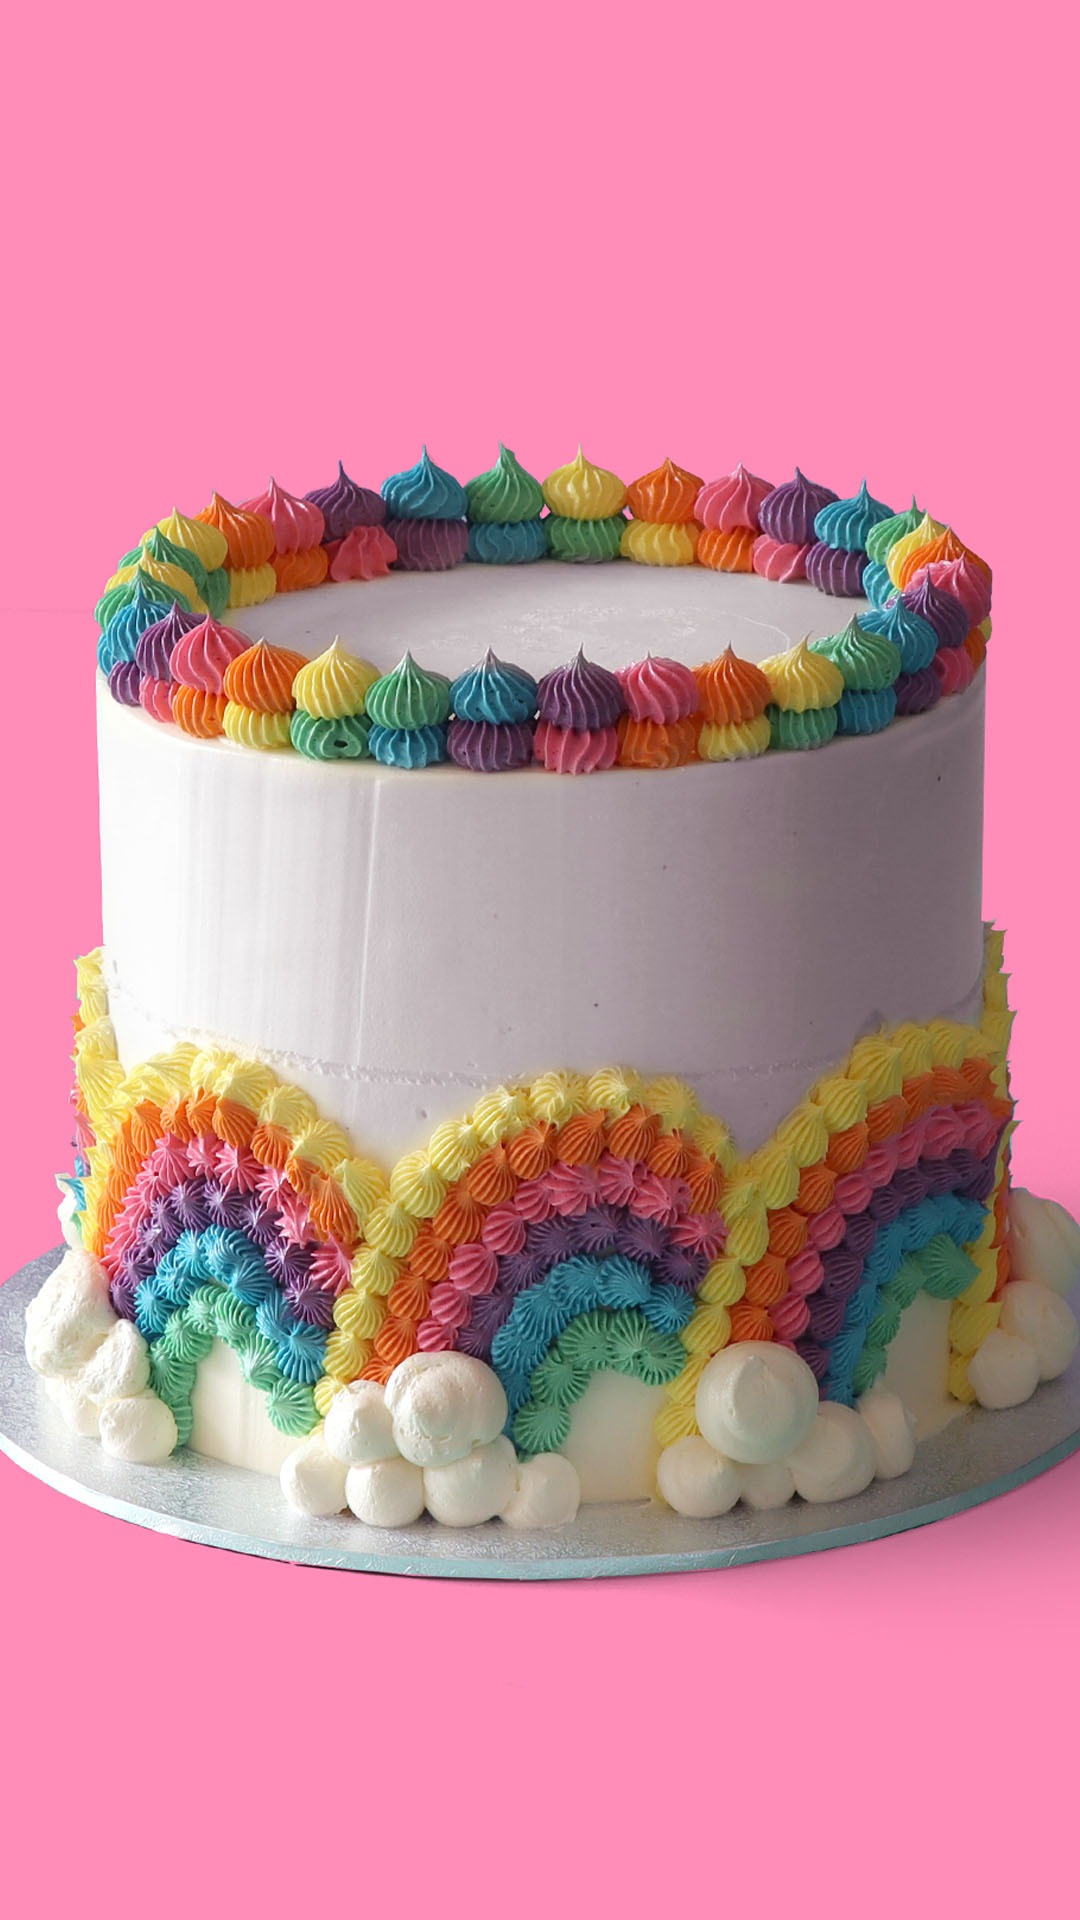 Min 1.5 Kg - Rainbow cake - Online Gifts Delivery in Dubai UAE